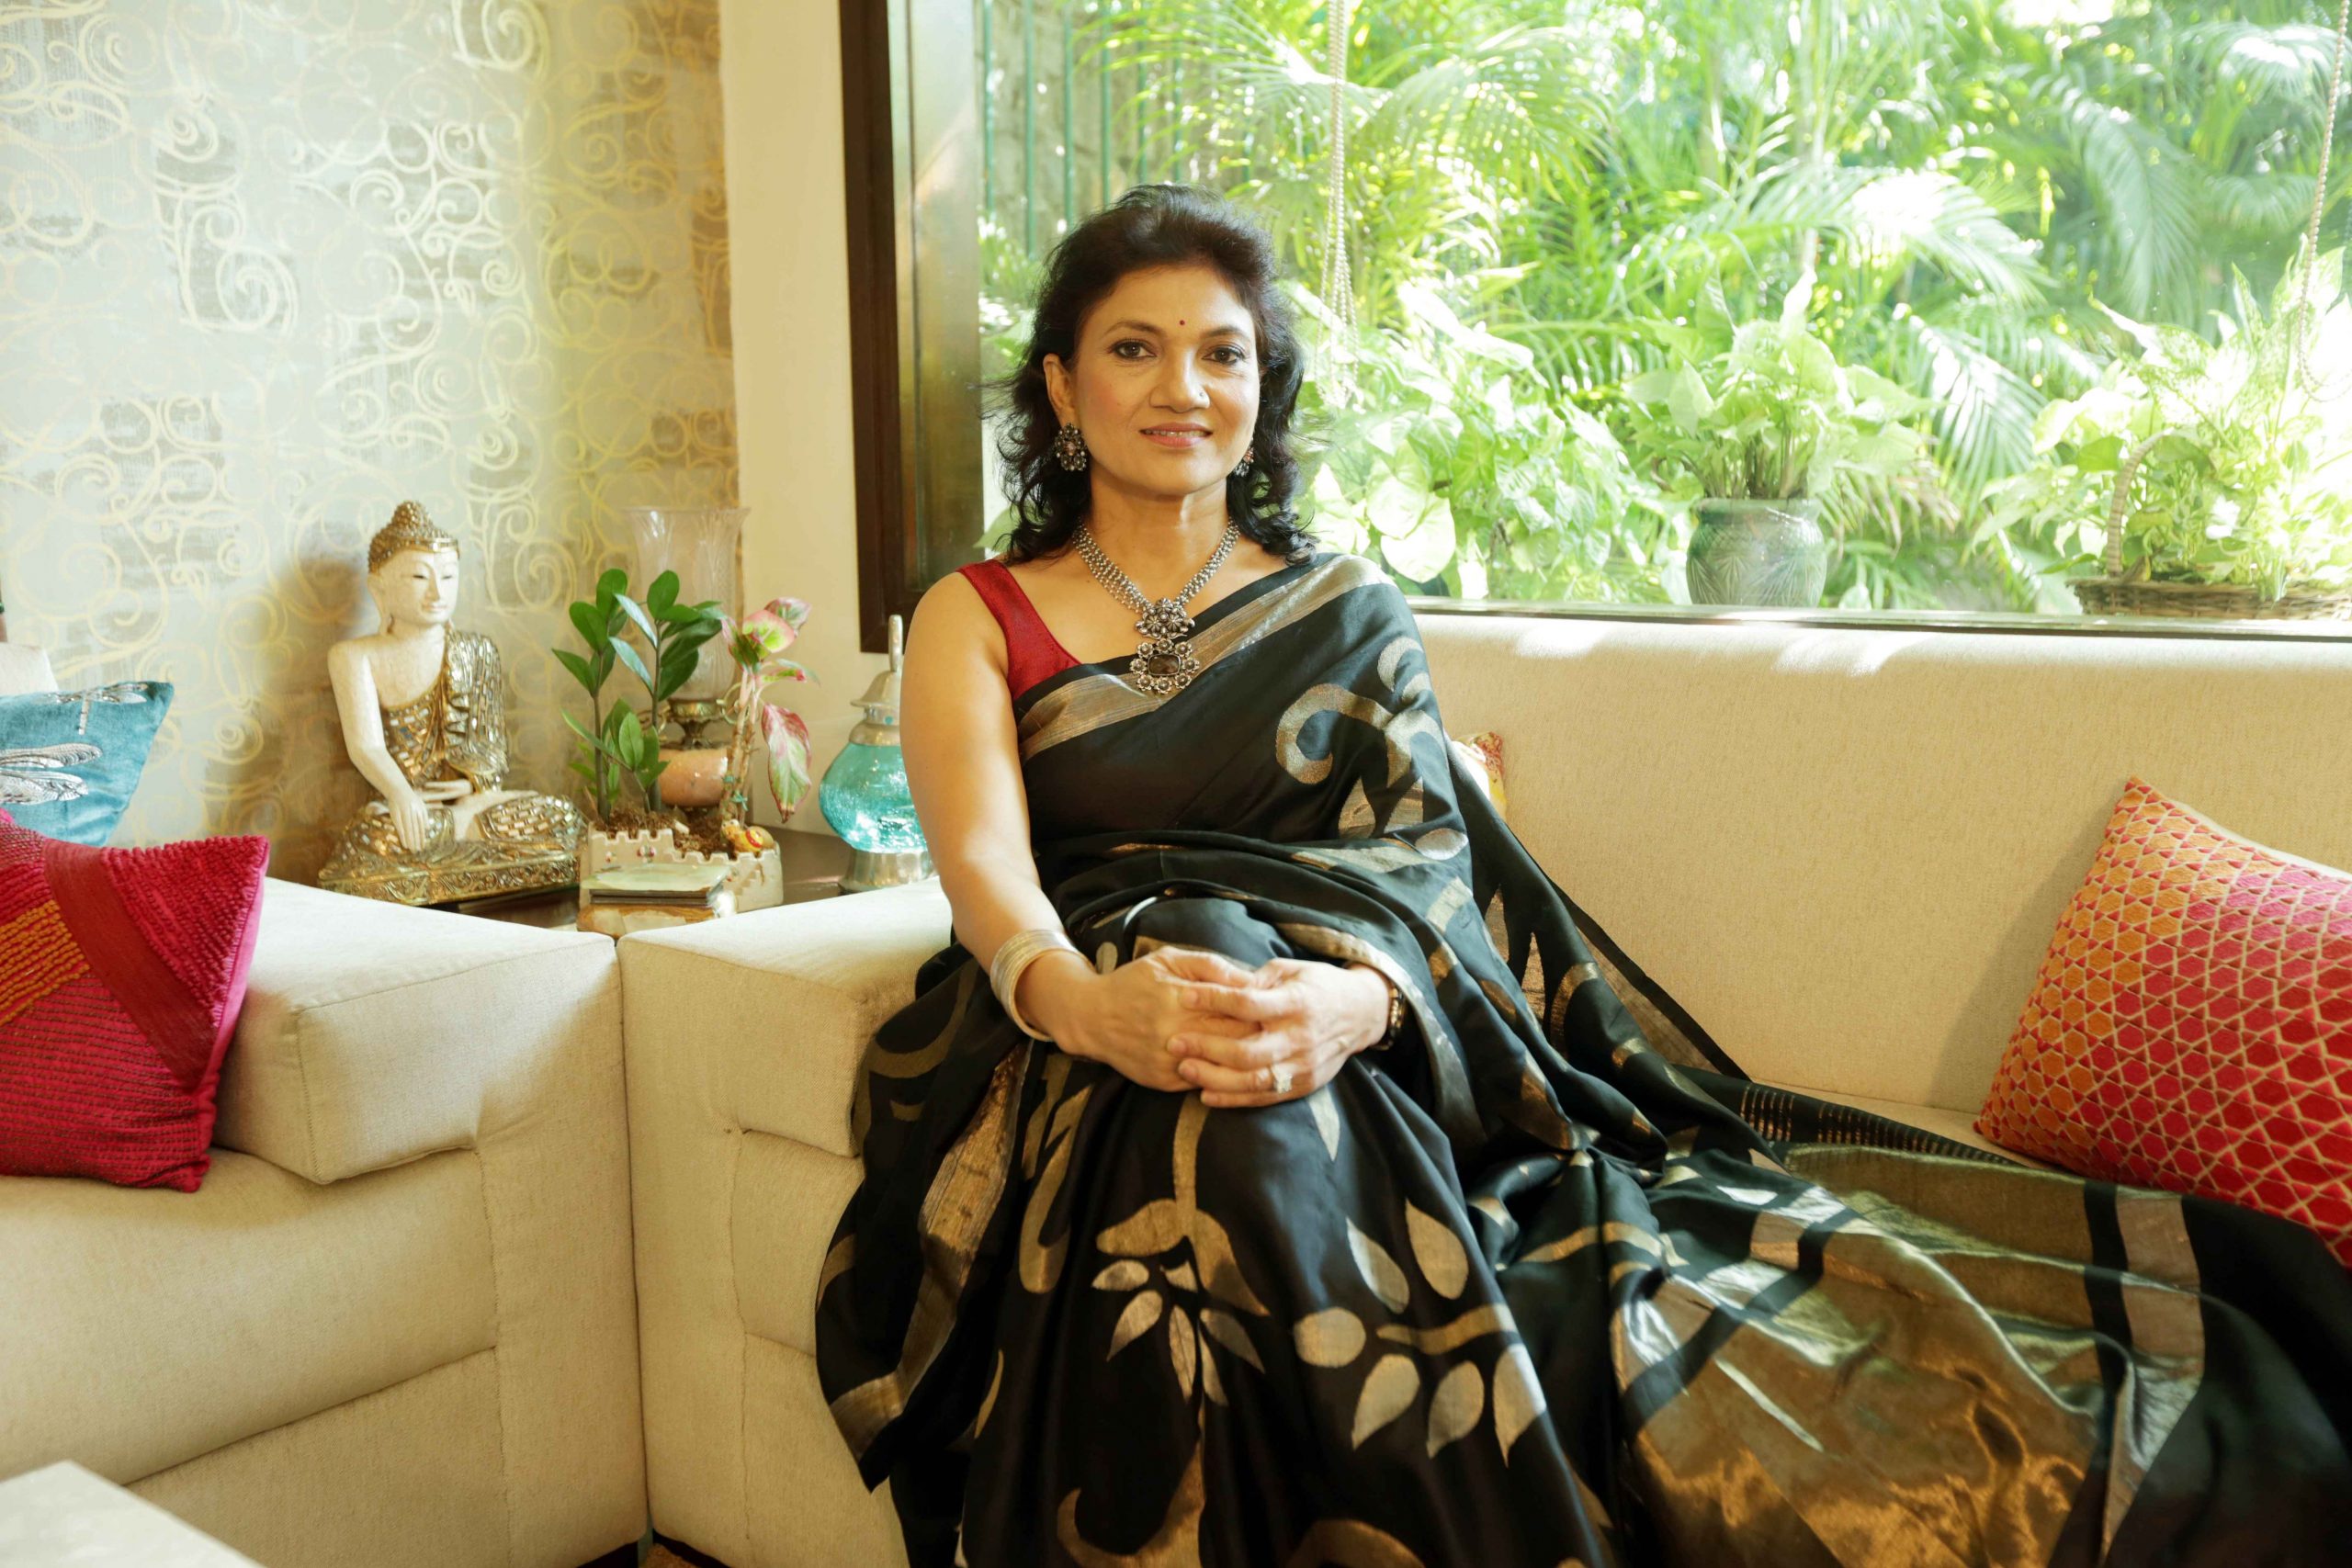 Housewife Started Career At 42 - Now Has 25 Crore Turnover, Multinational Corporate Contracts